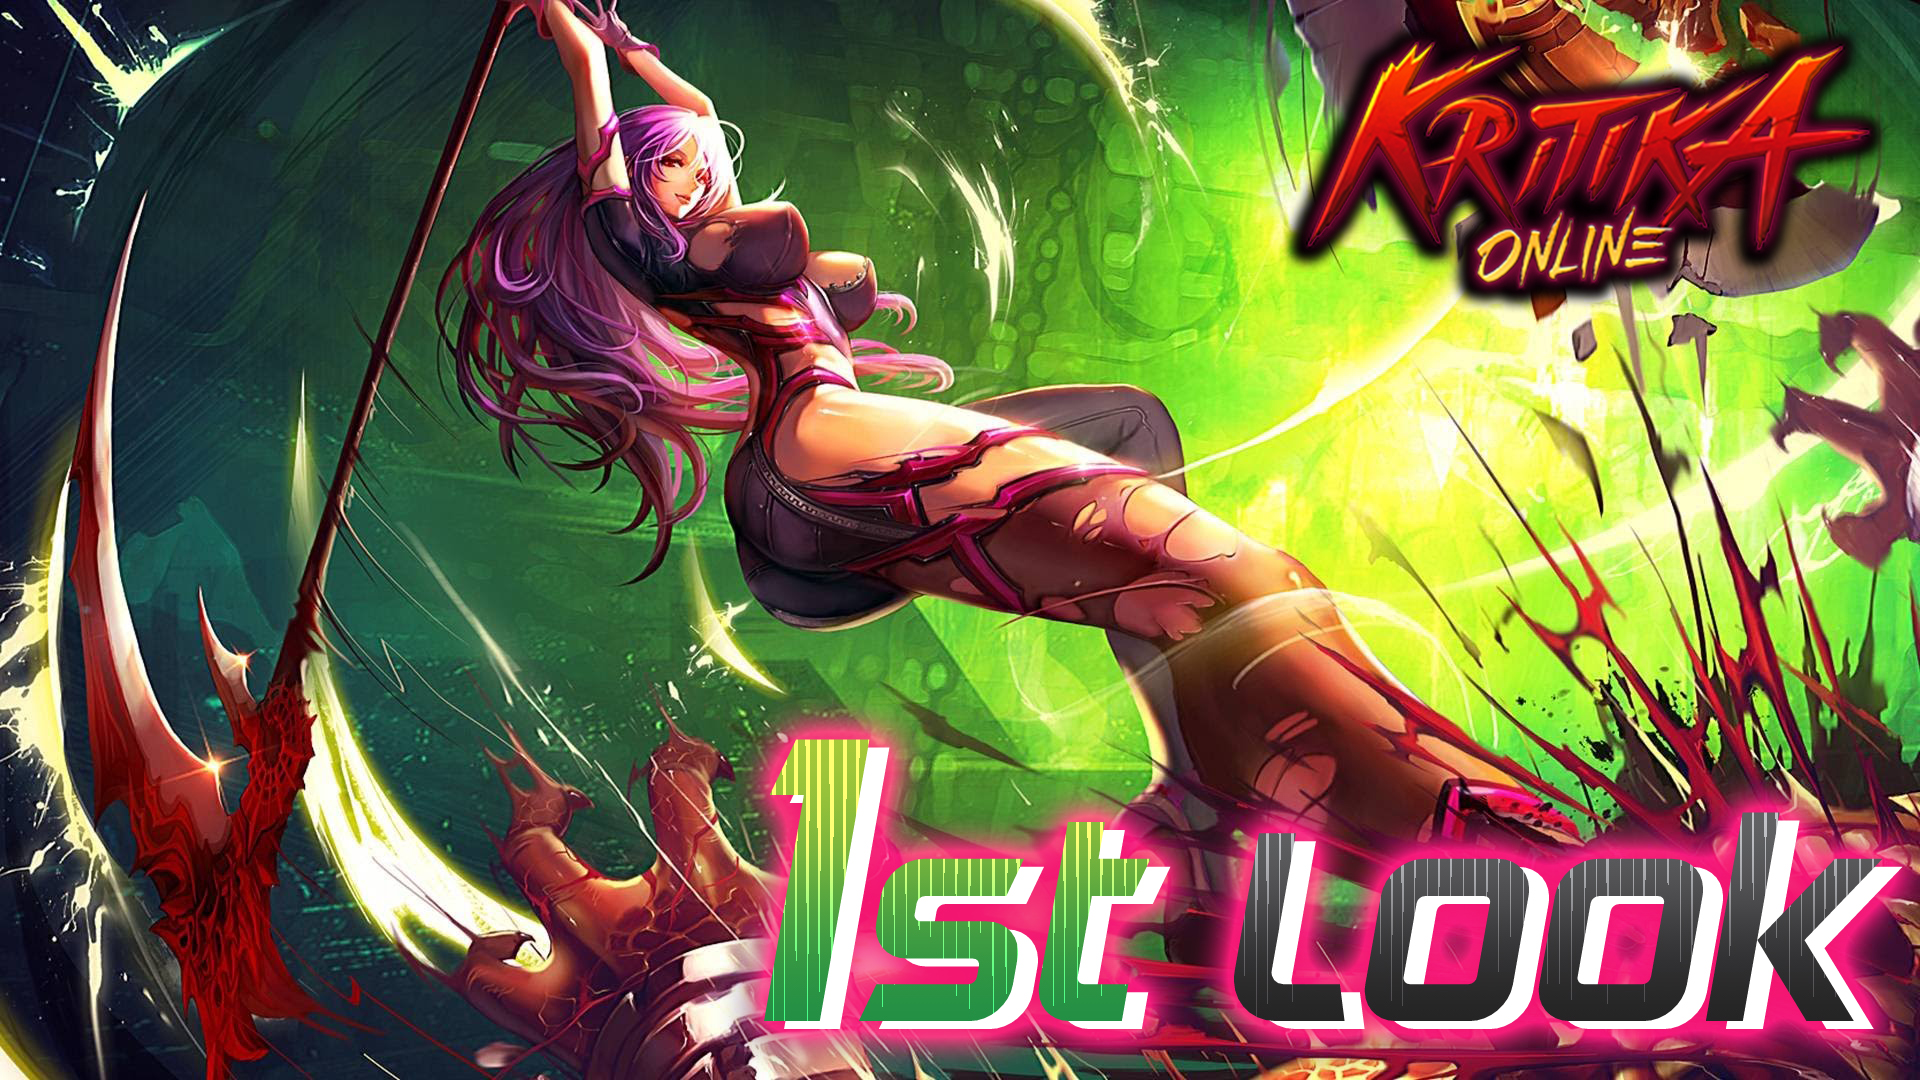 Colt takes a first look at Kritika Online now that it is in Open Beta.